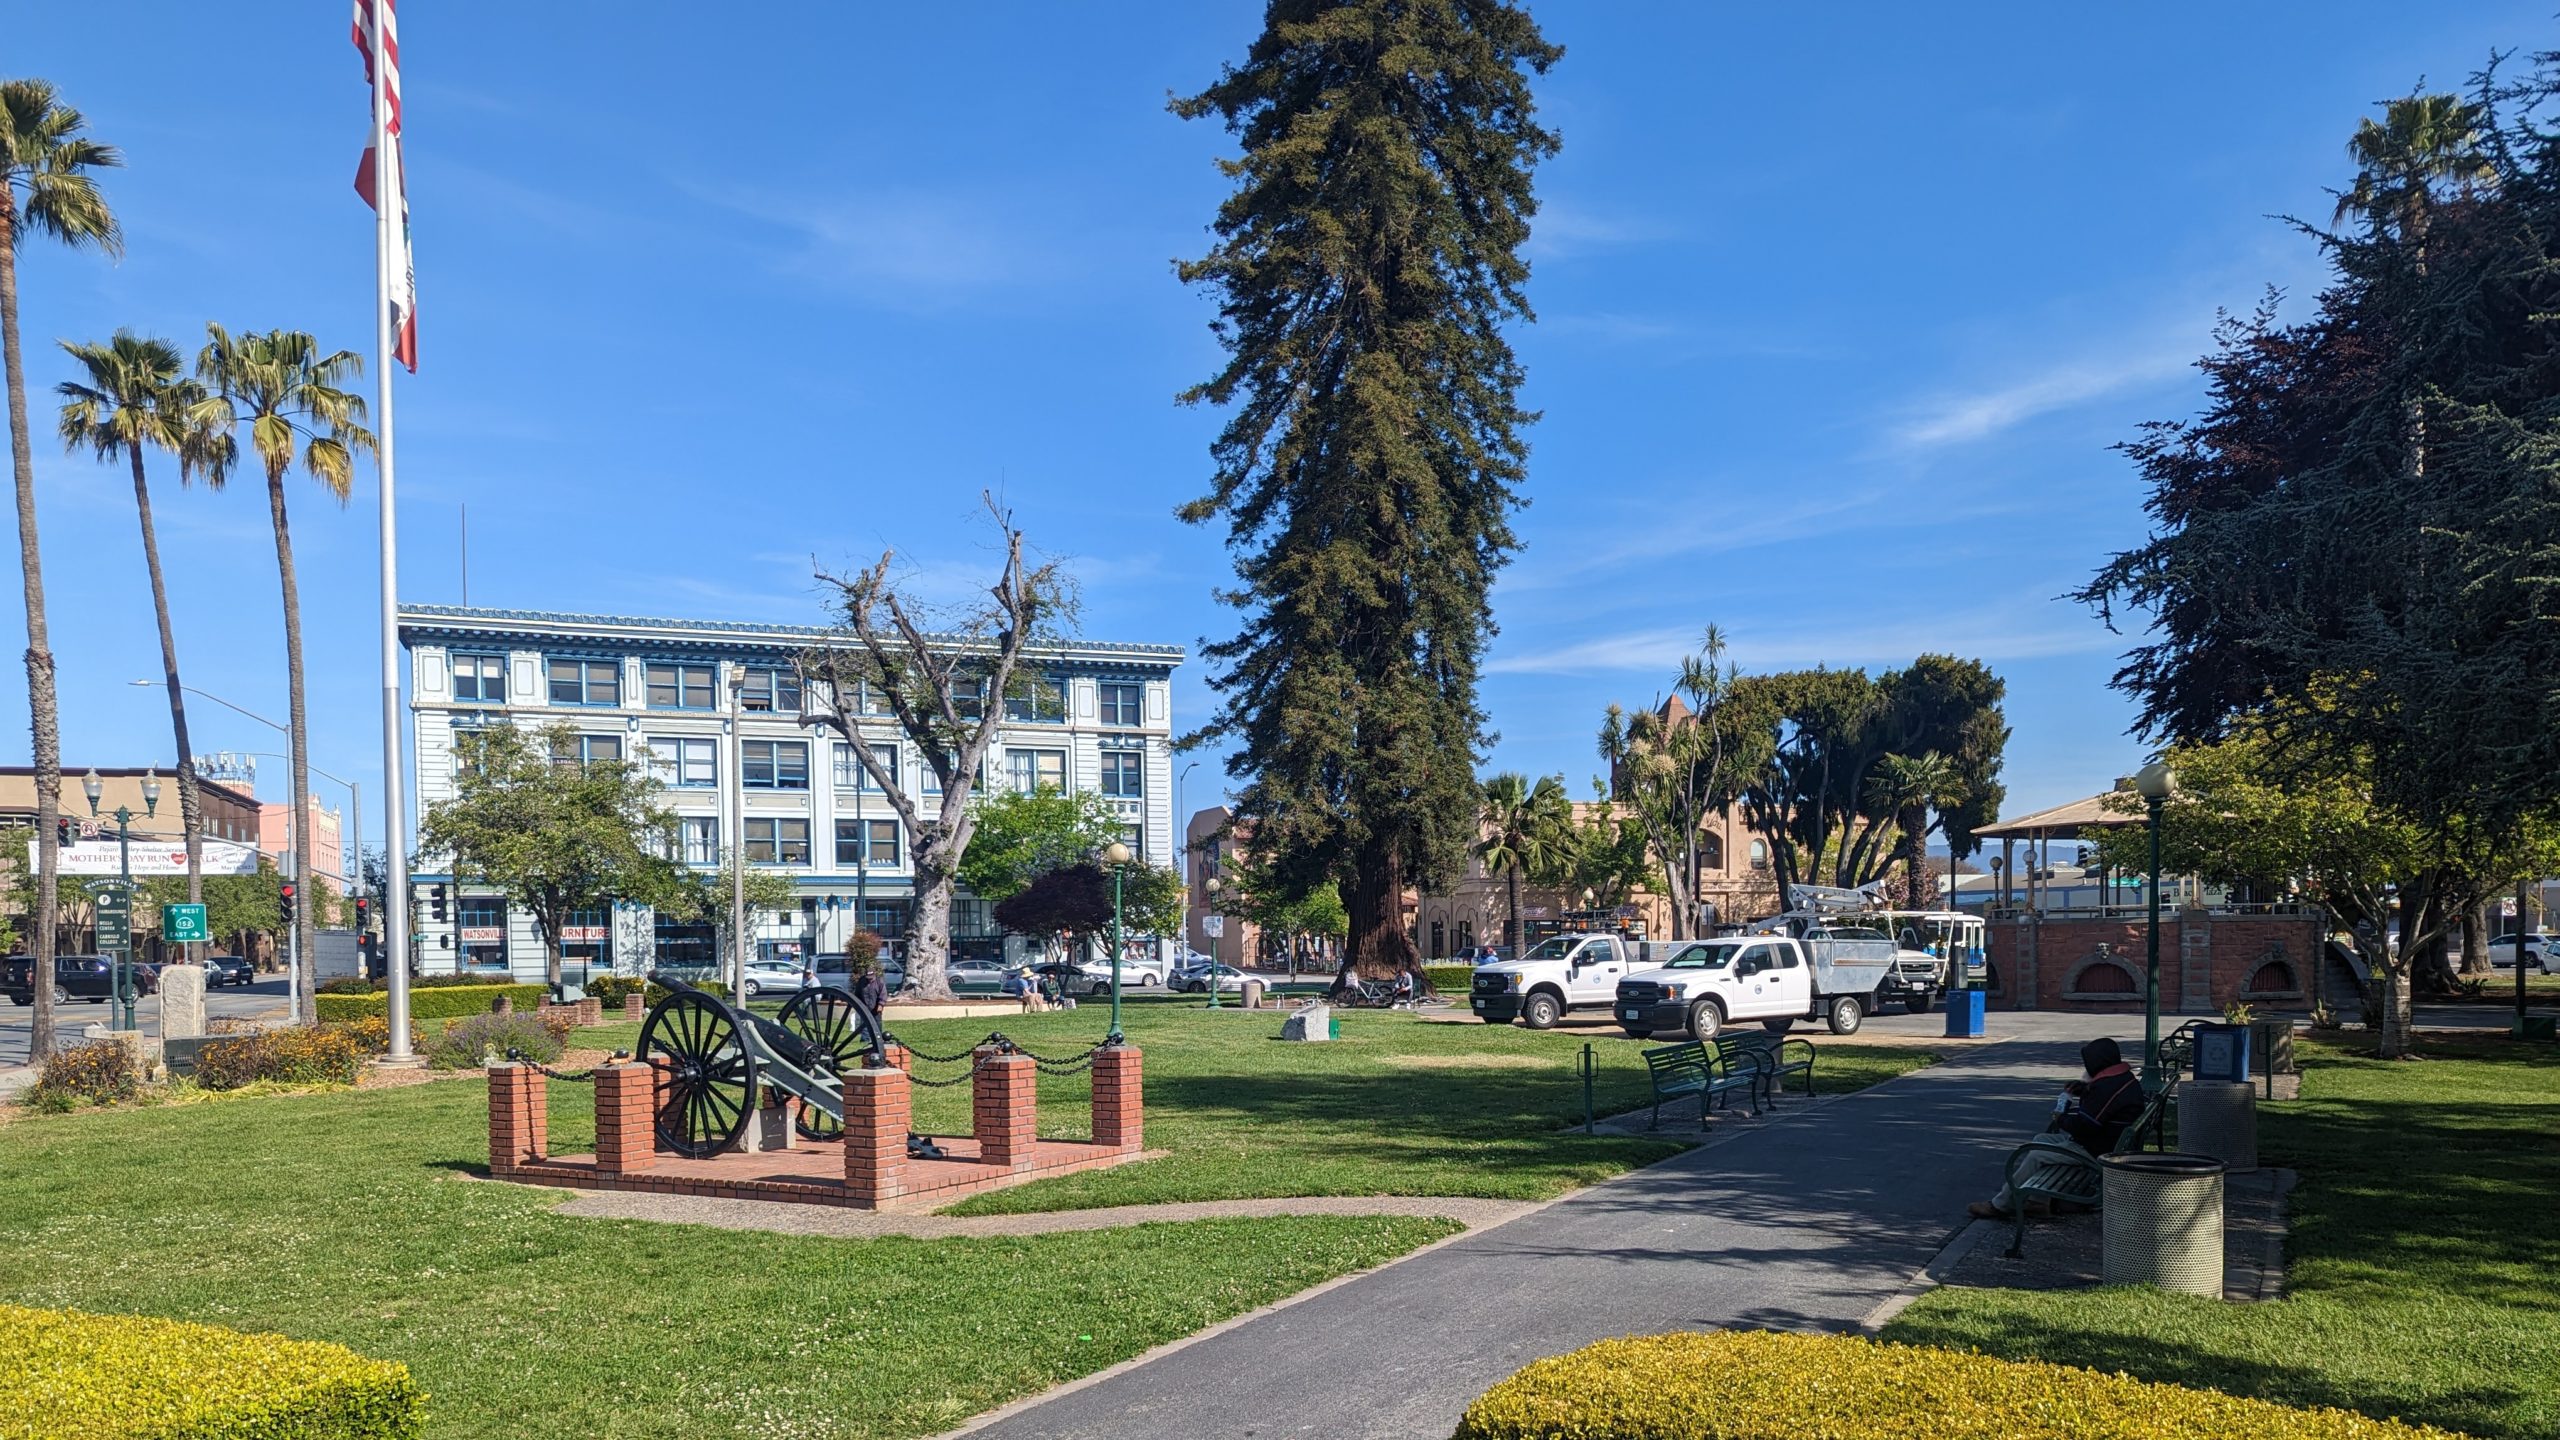 Watsonville's main plaza on a sunny day.